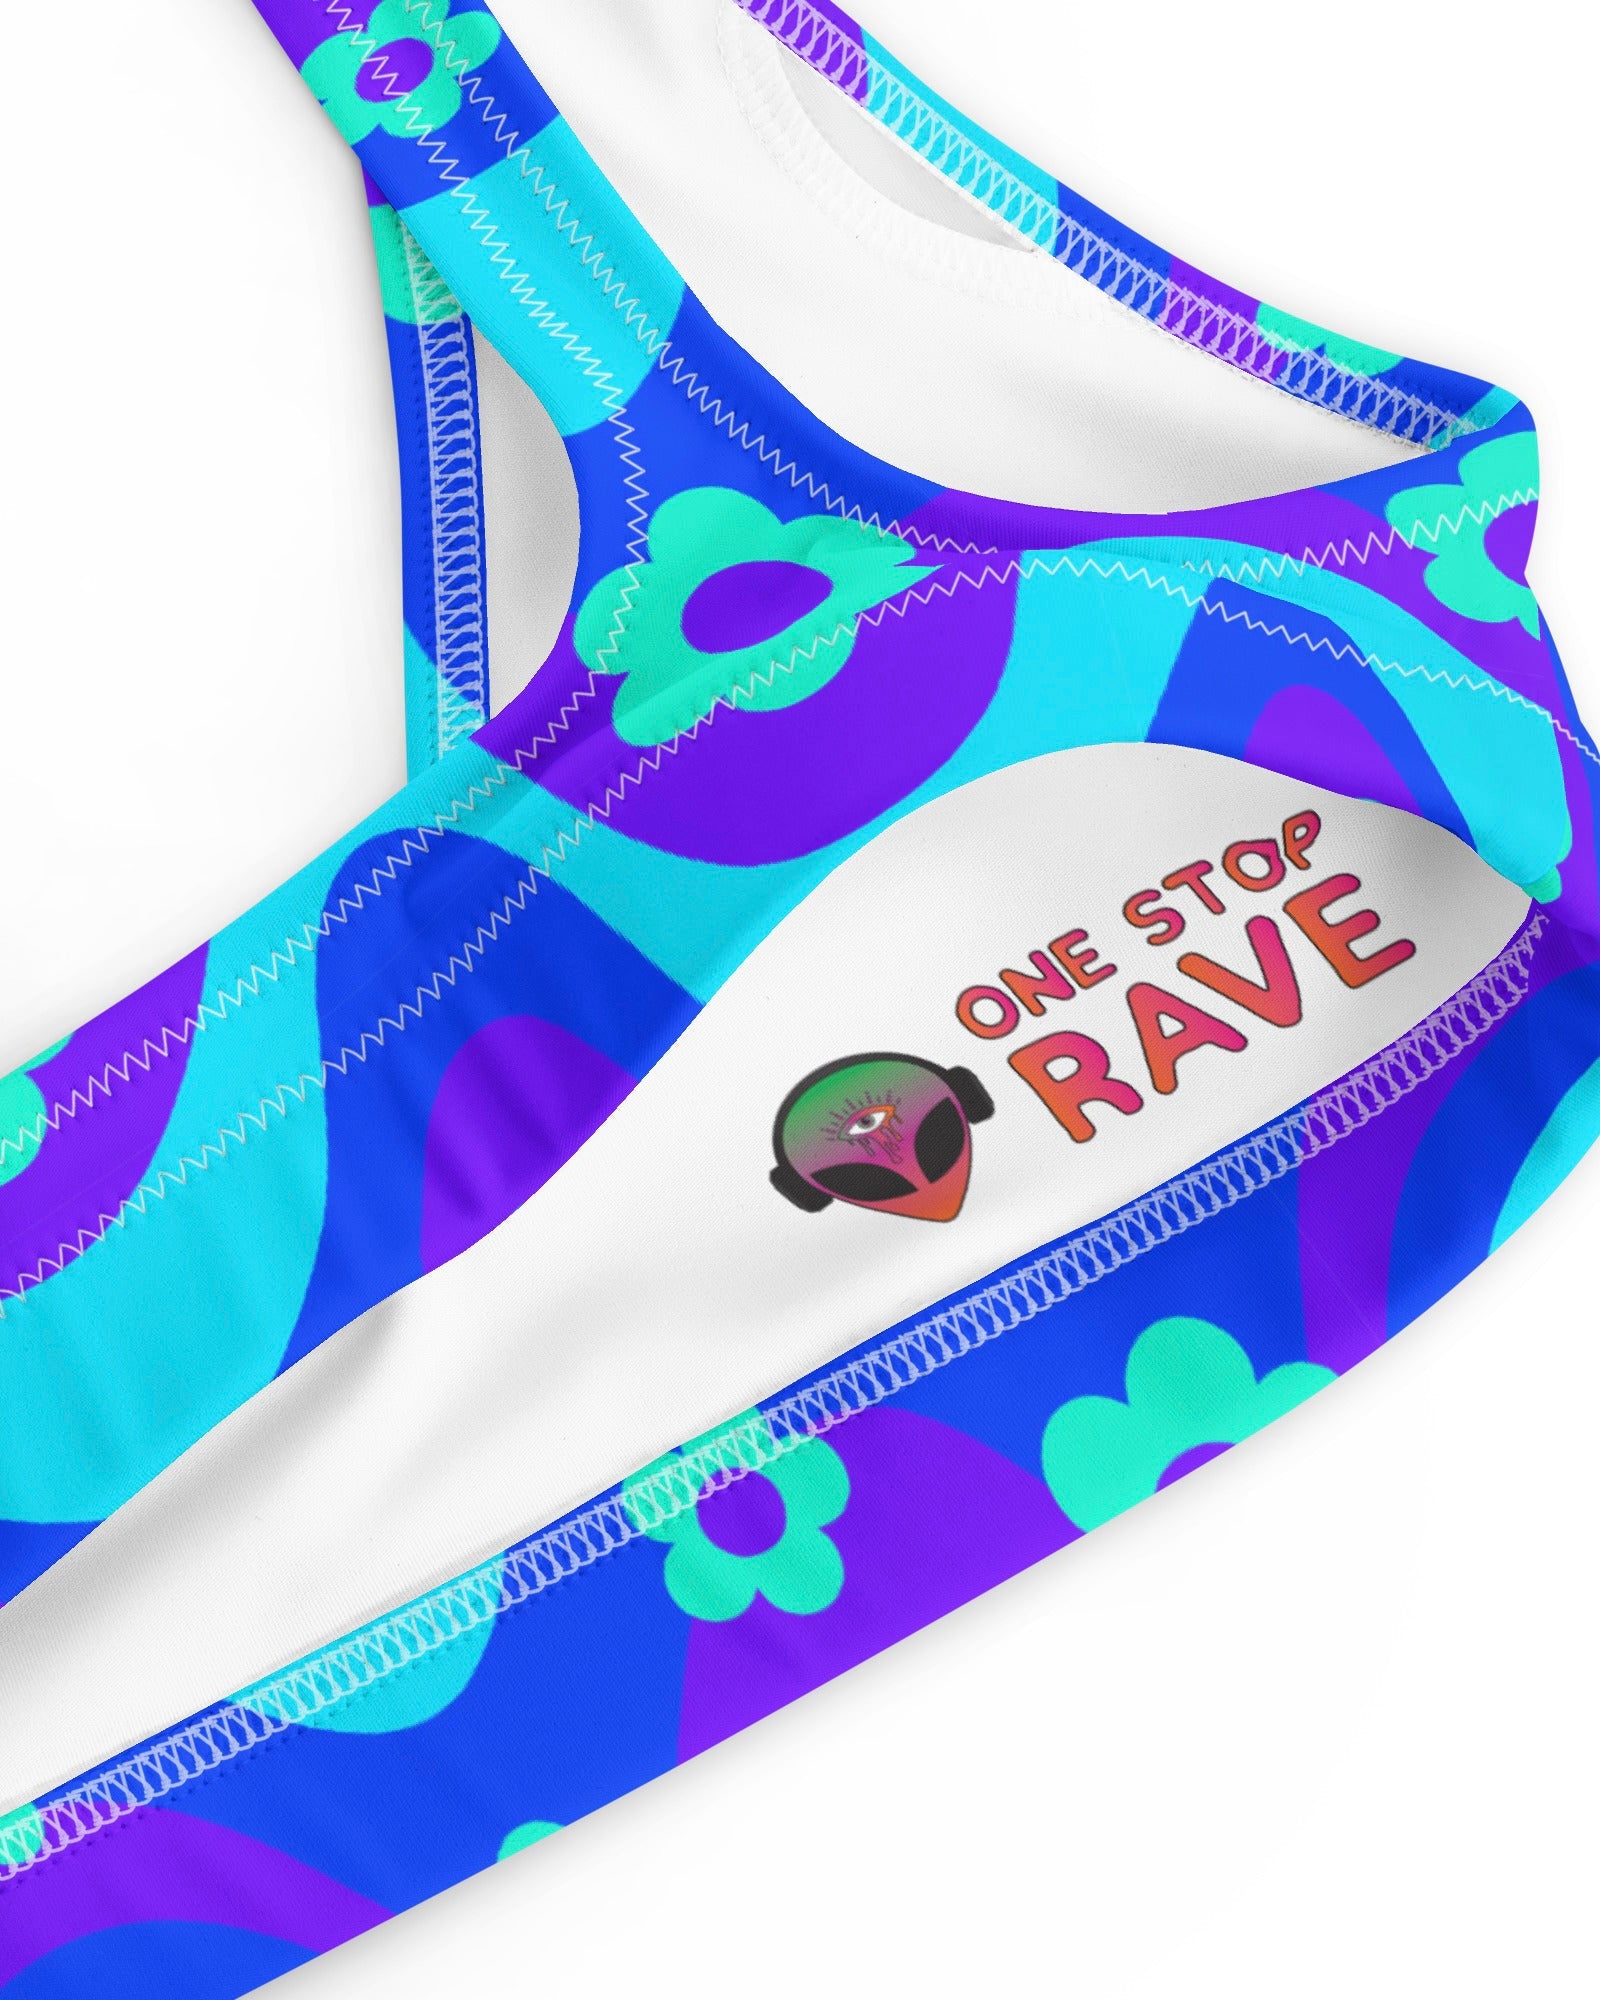 Flower Power Blue Recycled Padded V-Top, V-Top, - One Stop Rave